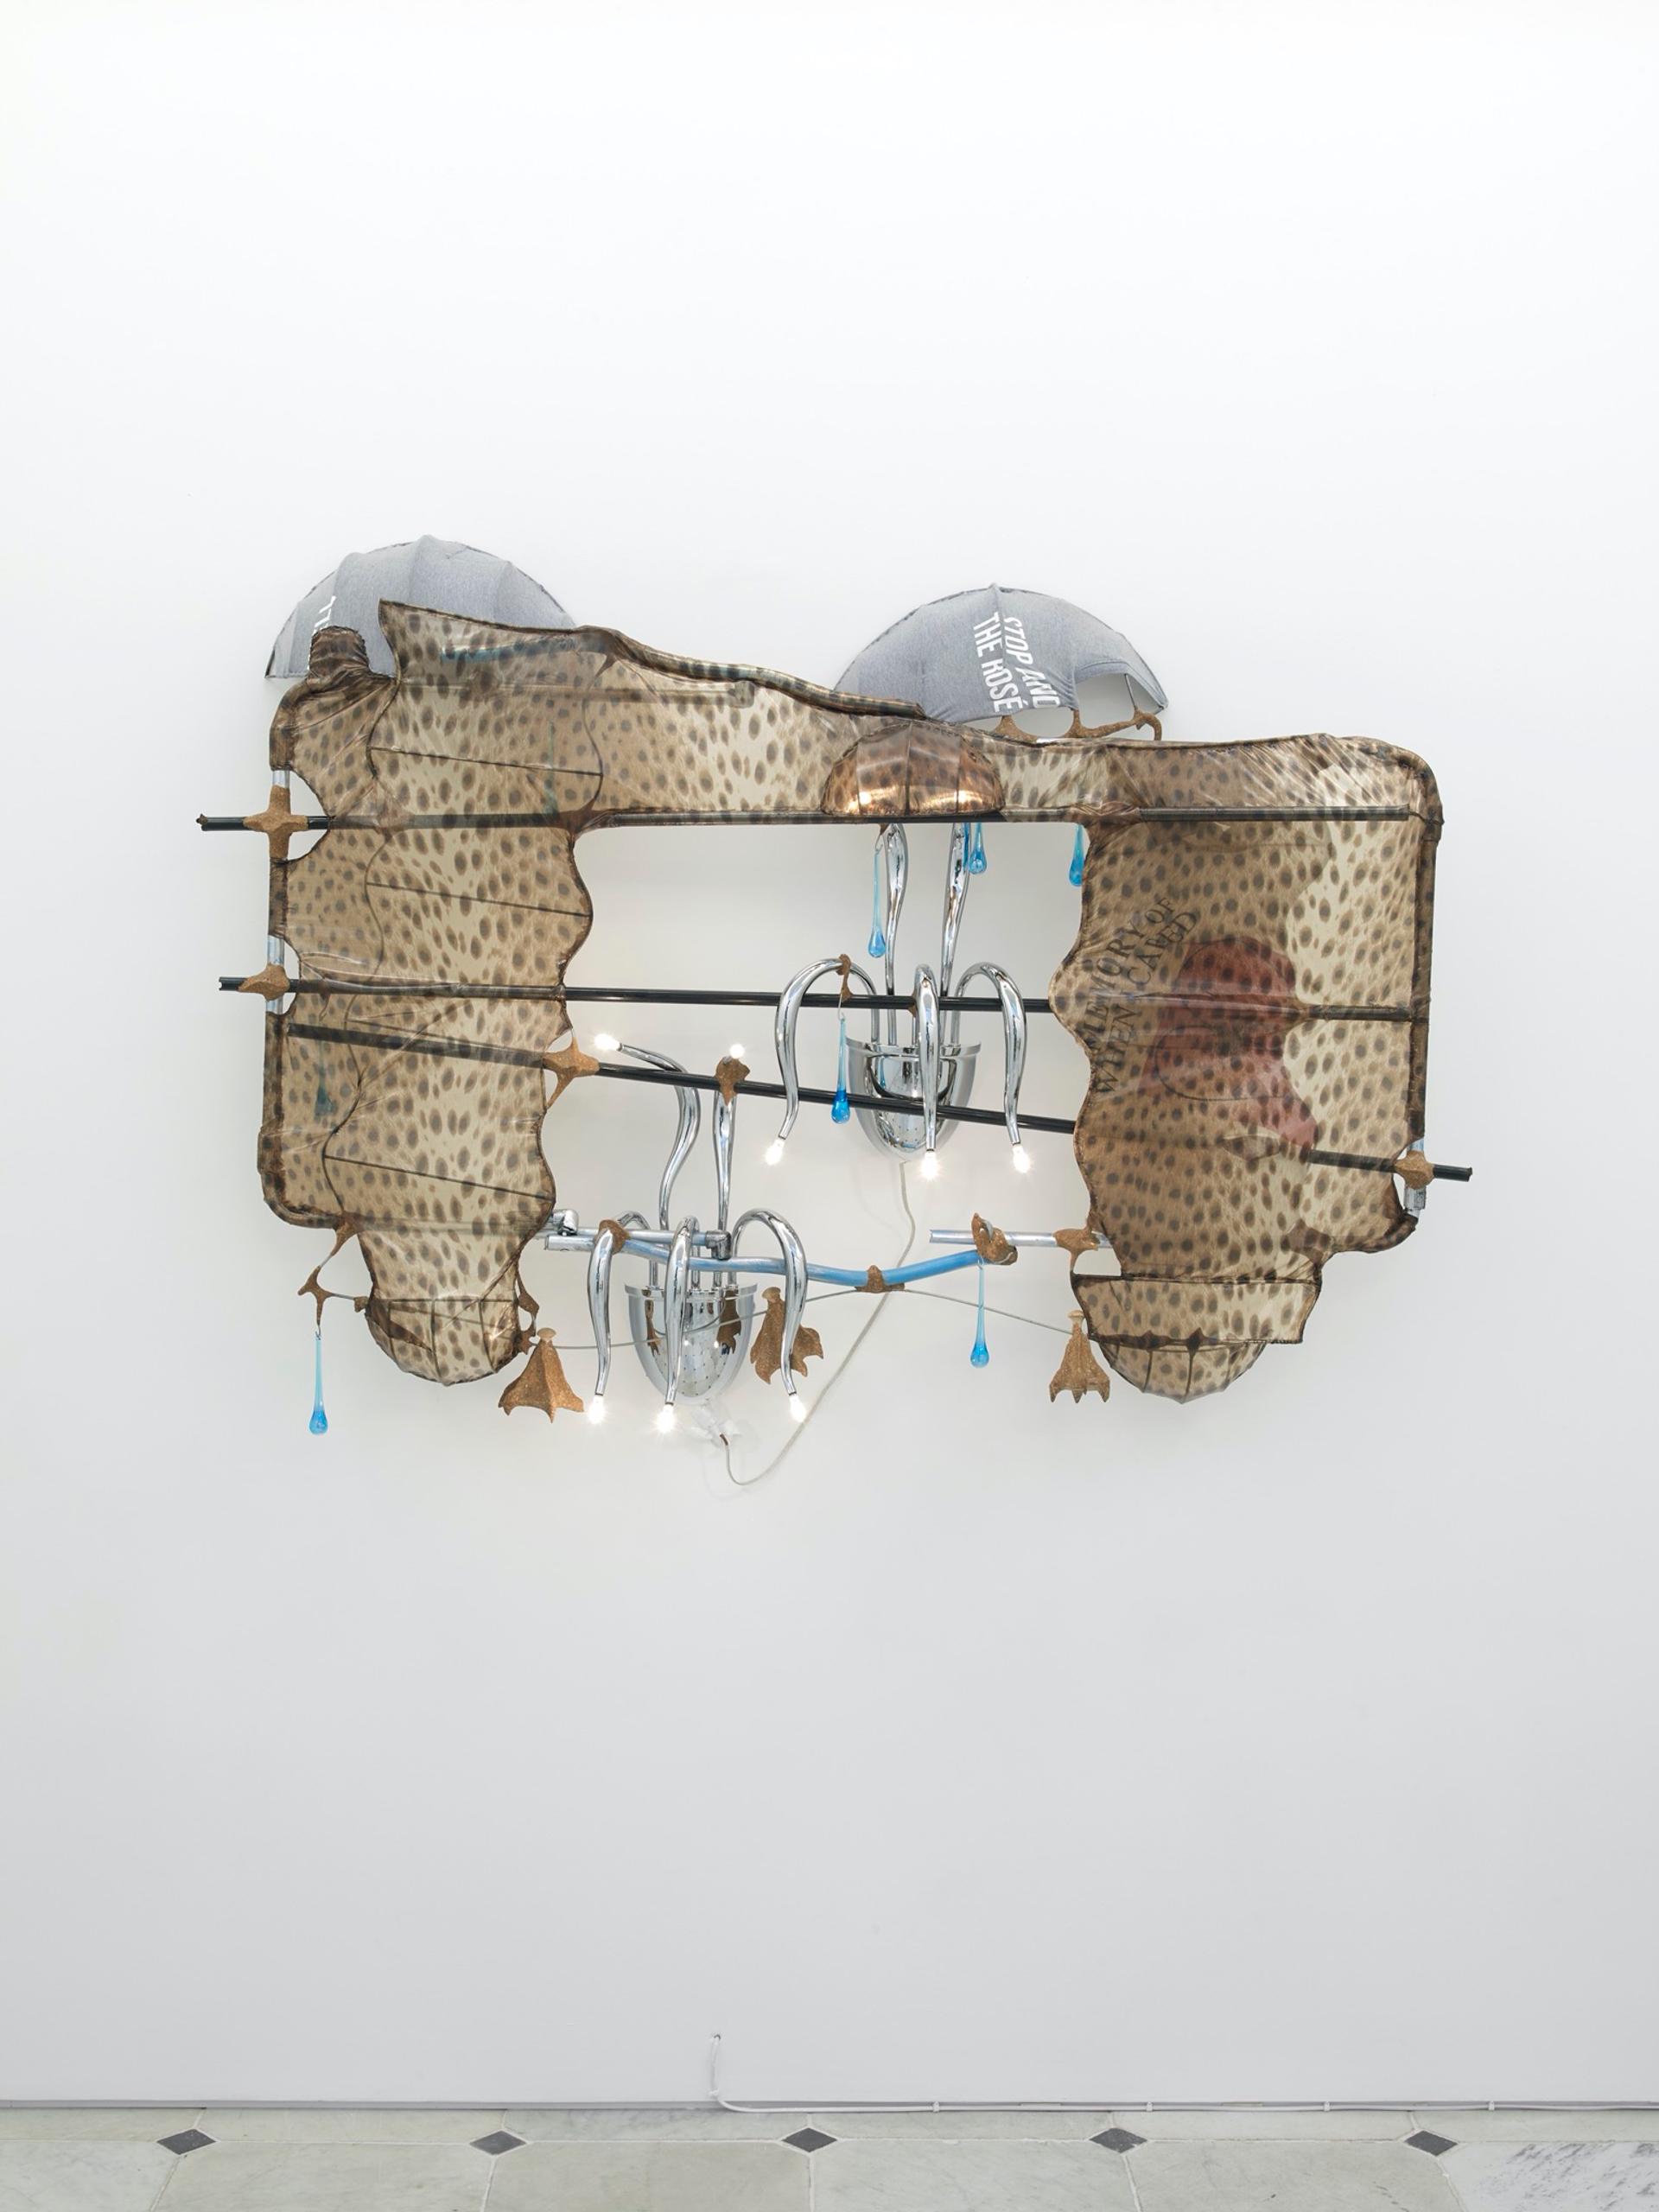 Jessi Reaves, Mantlepiece Sconce, 2019. Metal, glass, fabric, sawdust & wood glue, lamp wiring & bulbs. 41 × 58 × 12 in. (104.14 × 147.32 × 30.48 cm) Courtesy the artist, Herald St, London and Bridget Donahue NYC. Photo: Andy Keate.